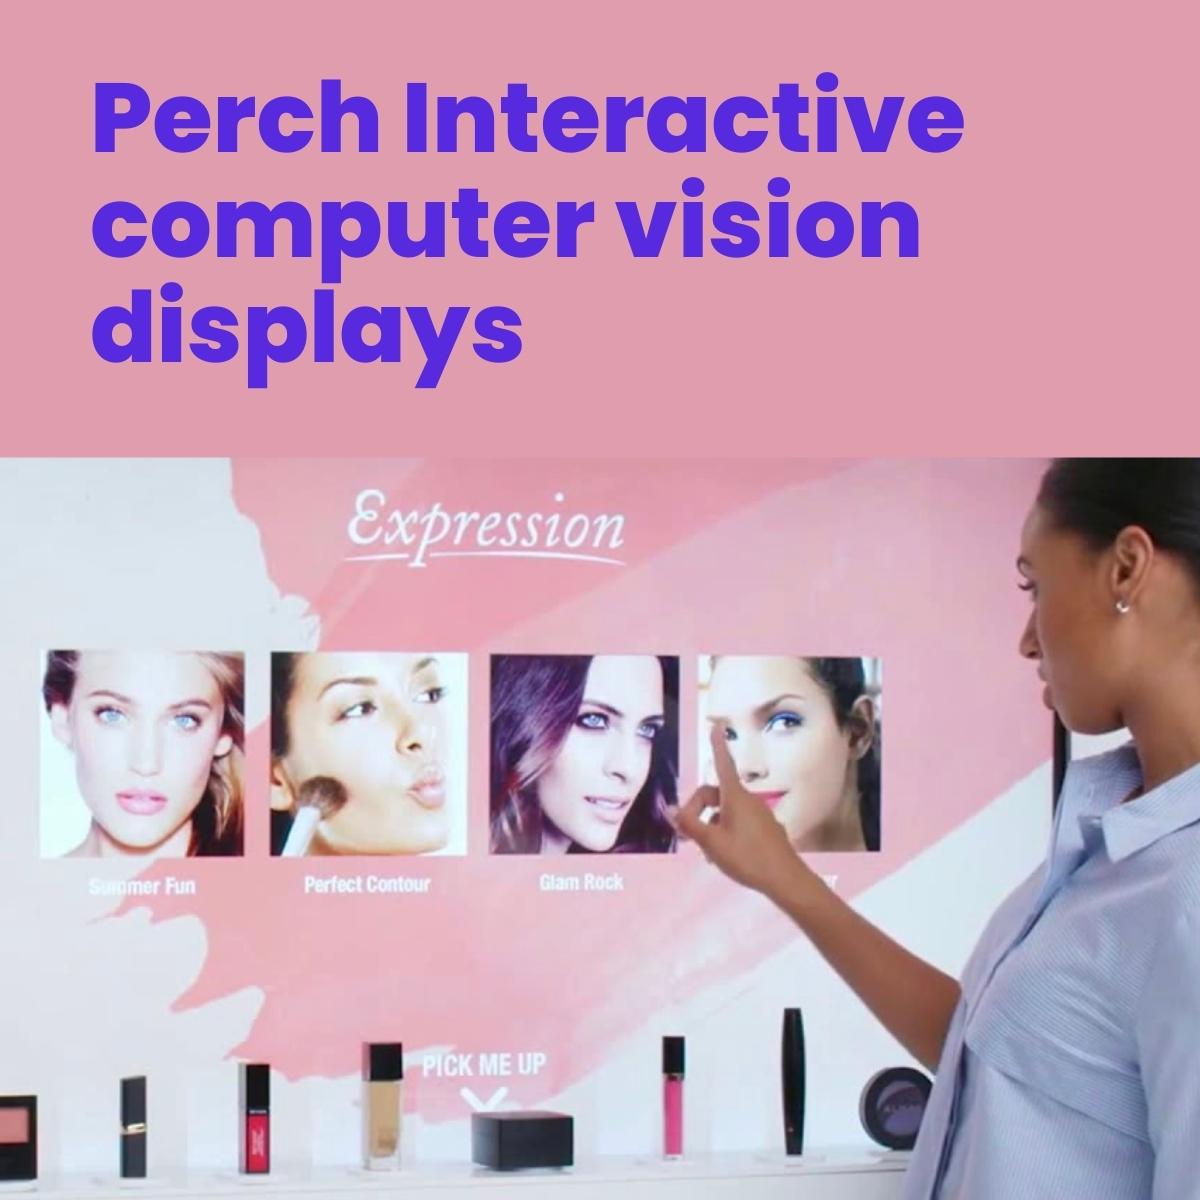 A woman interacting with computer vision displays